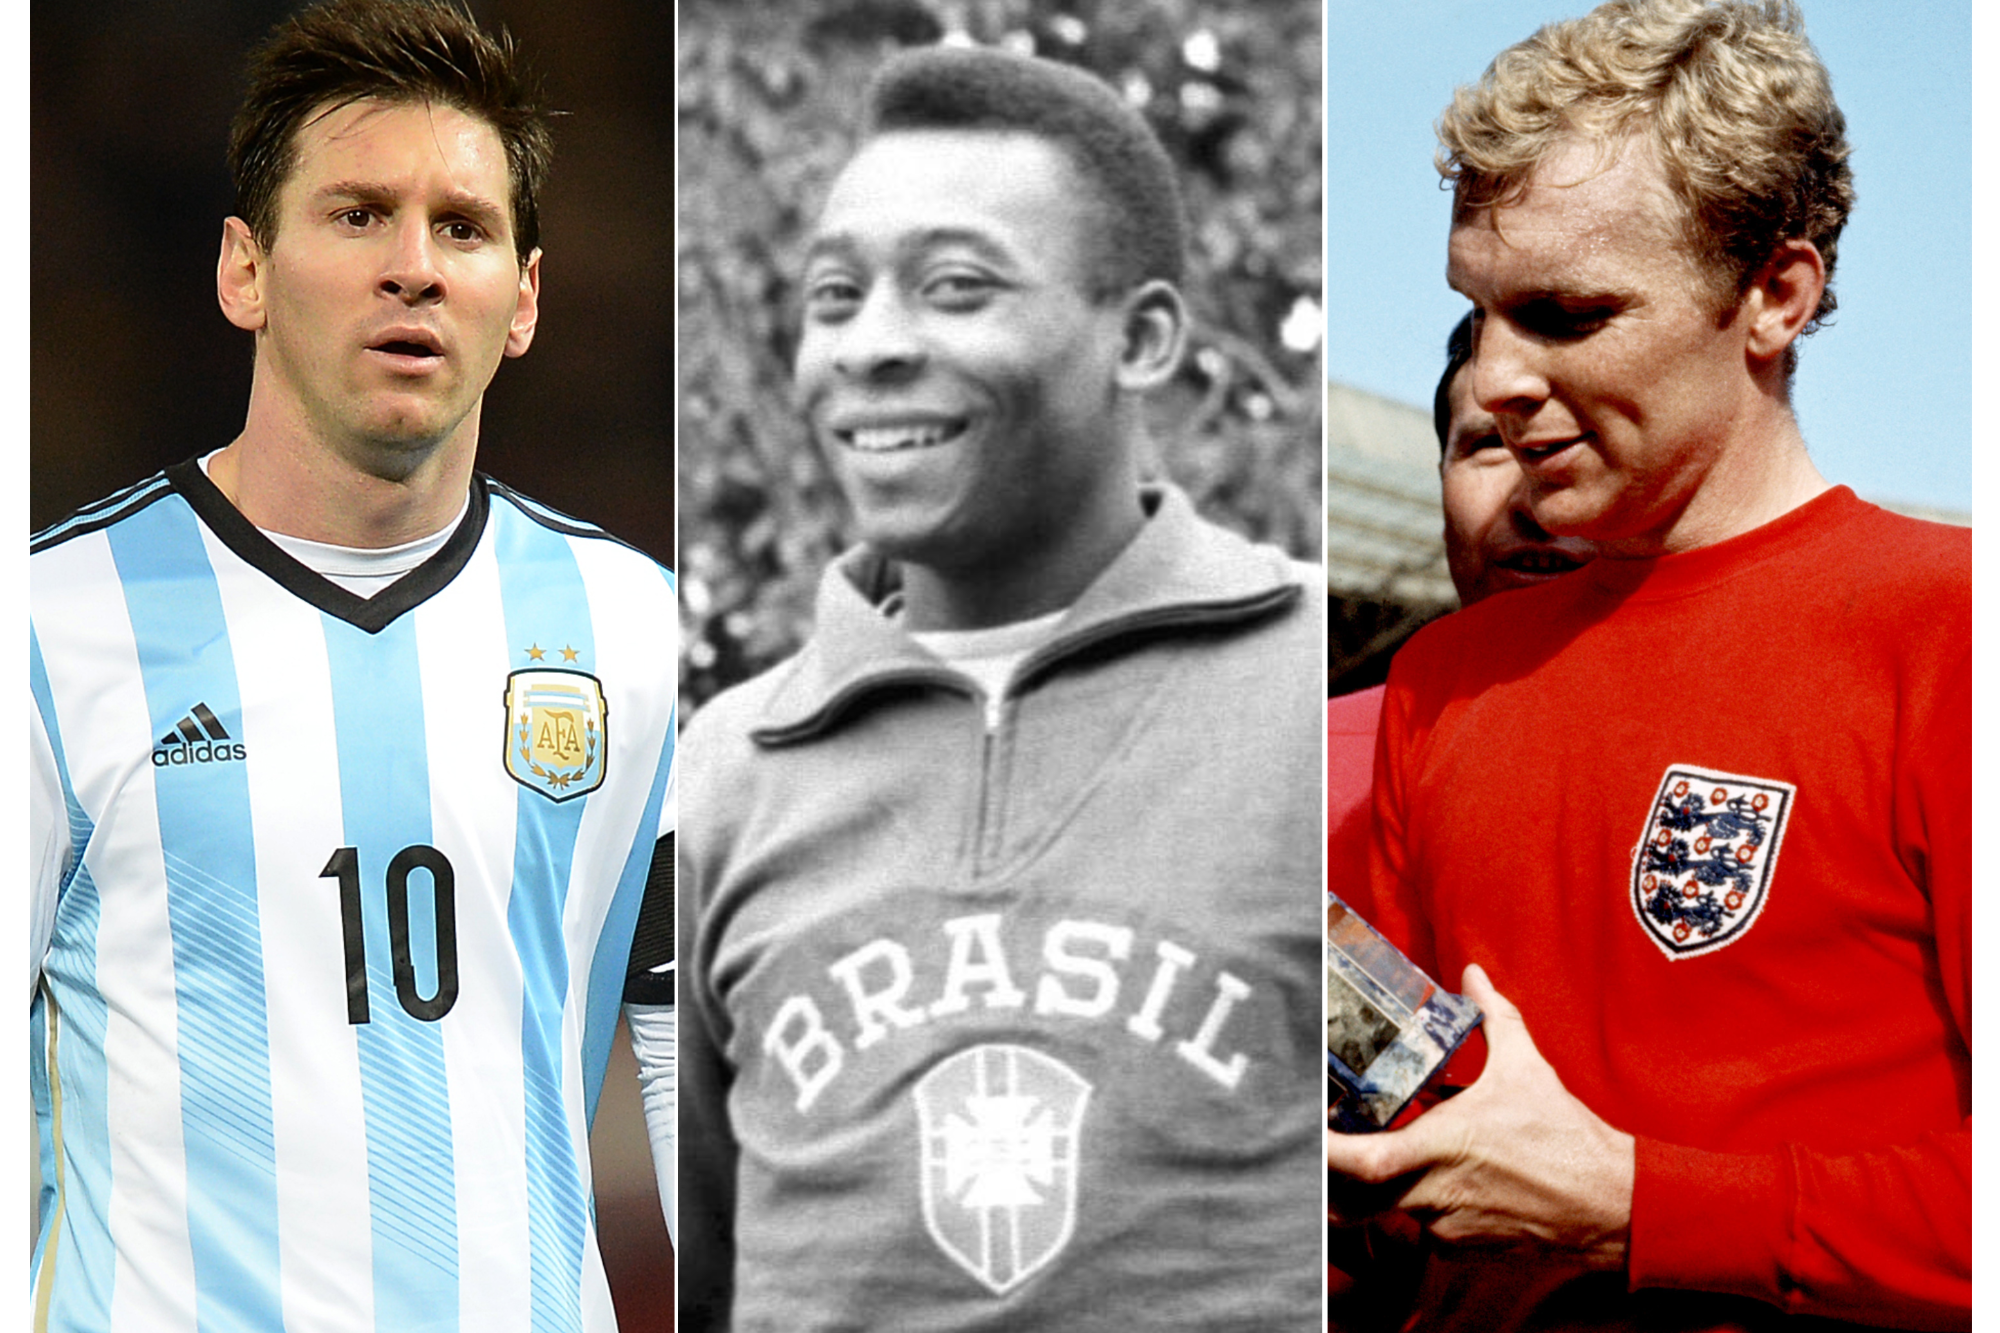 Pele, Maradona, Messi: Who is the greatest of all time?